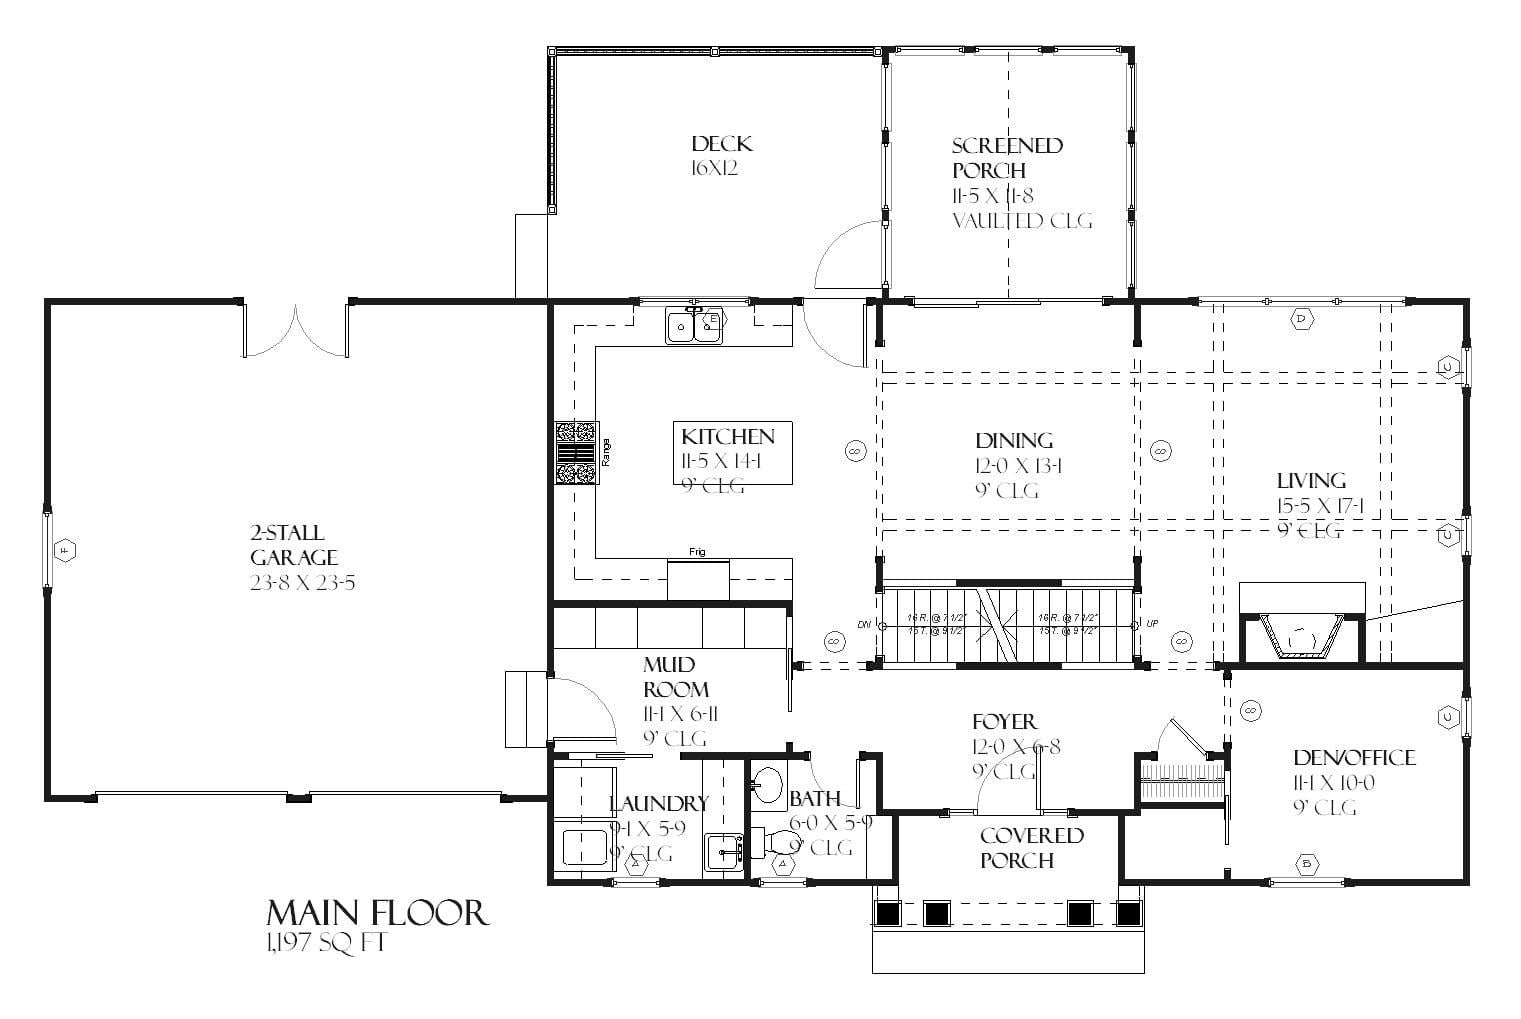 Rexford - Home Design and Floor Plan - SketchPad House Plans